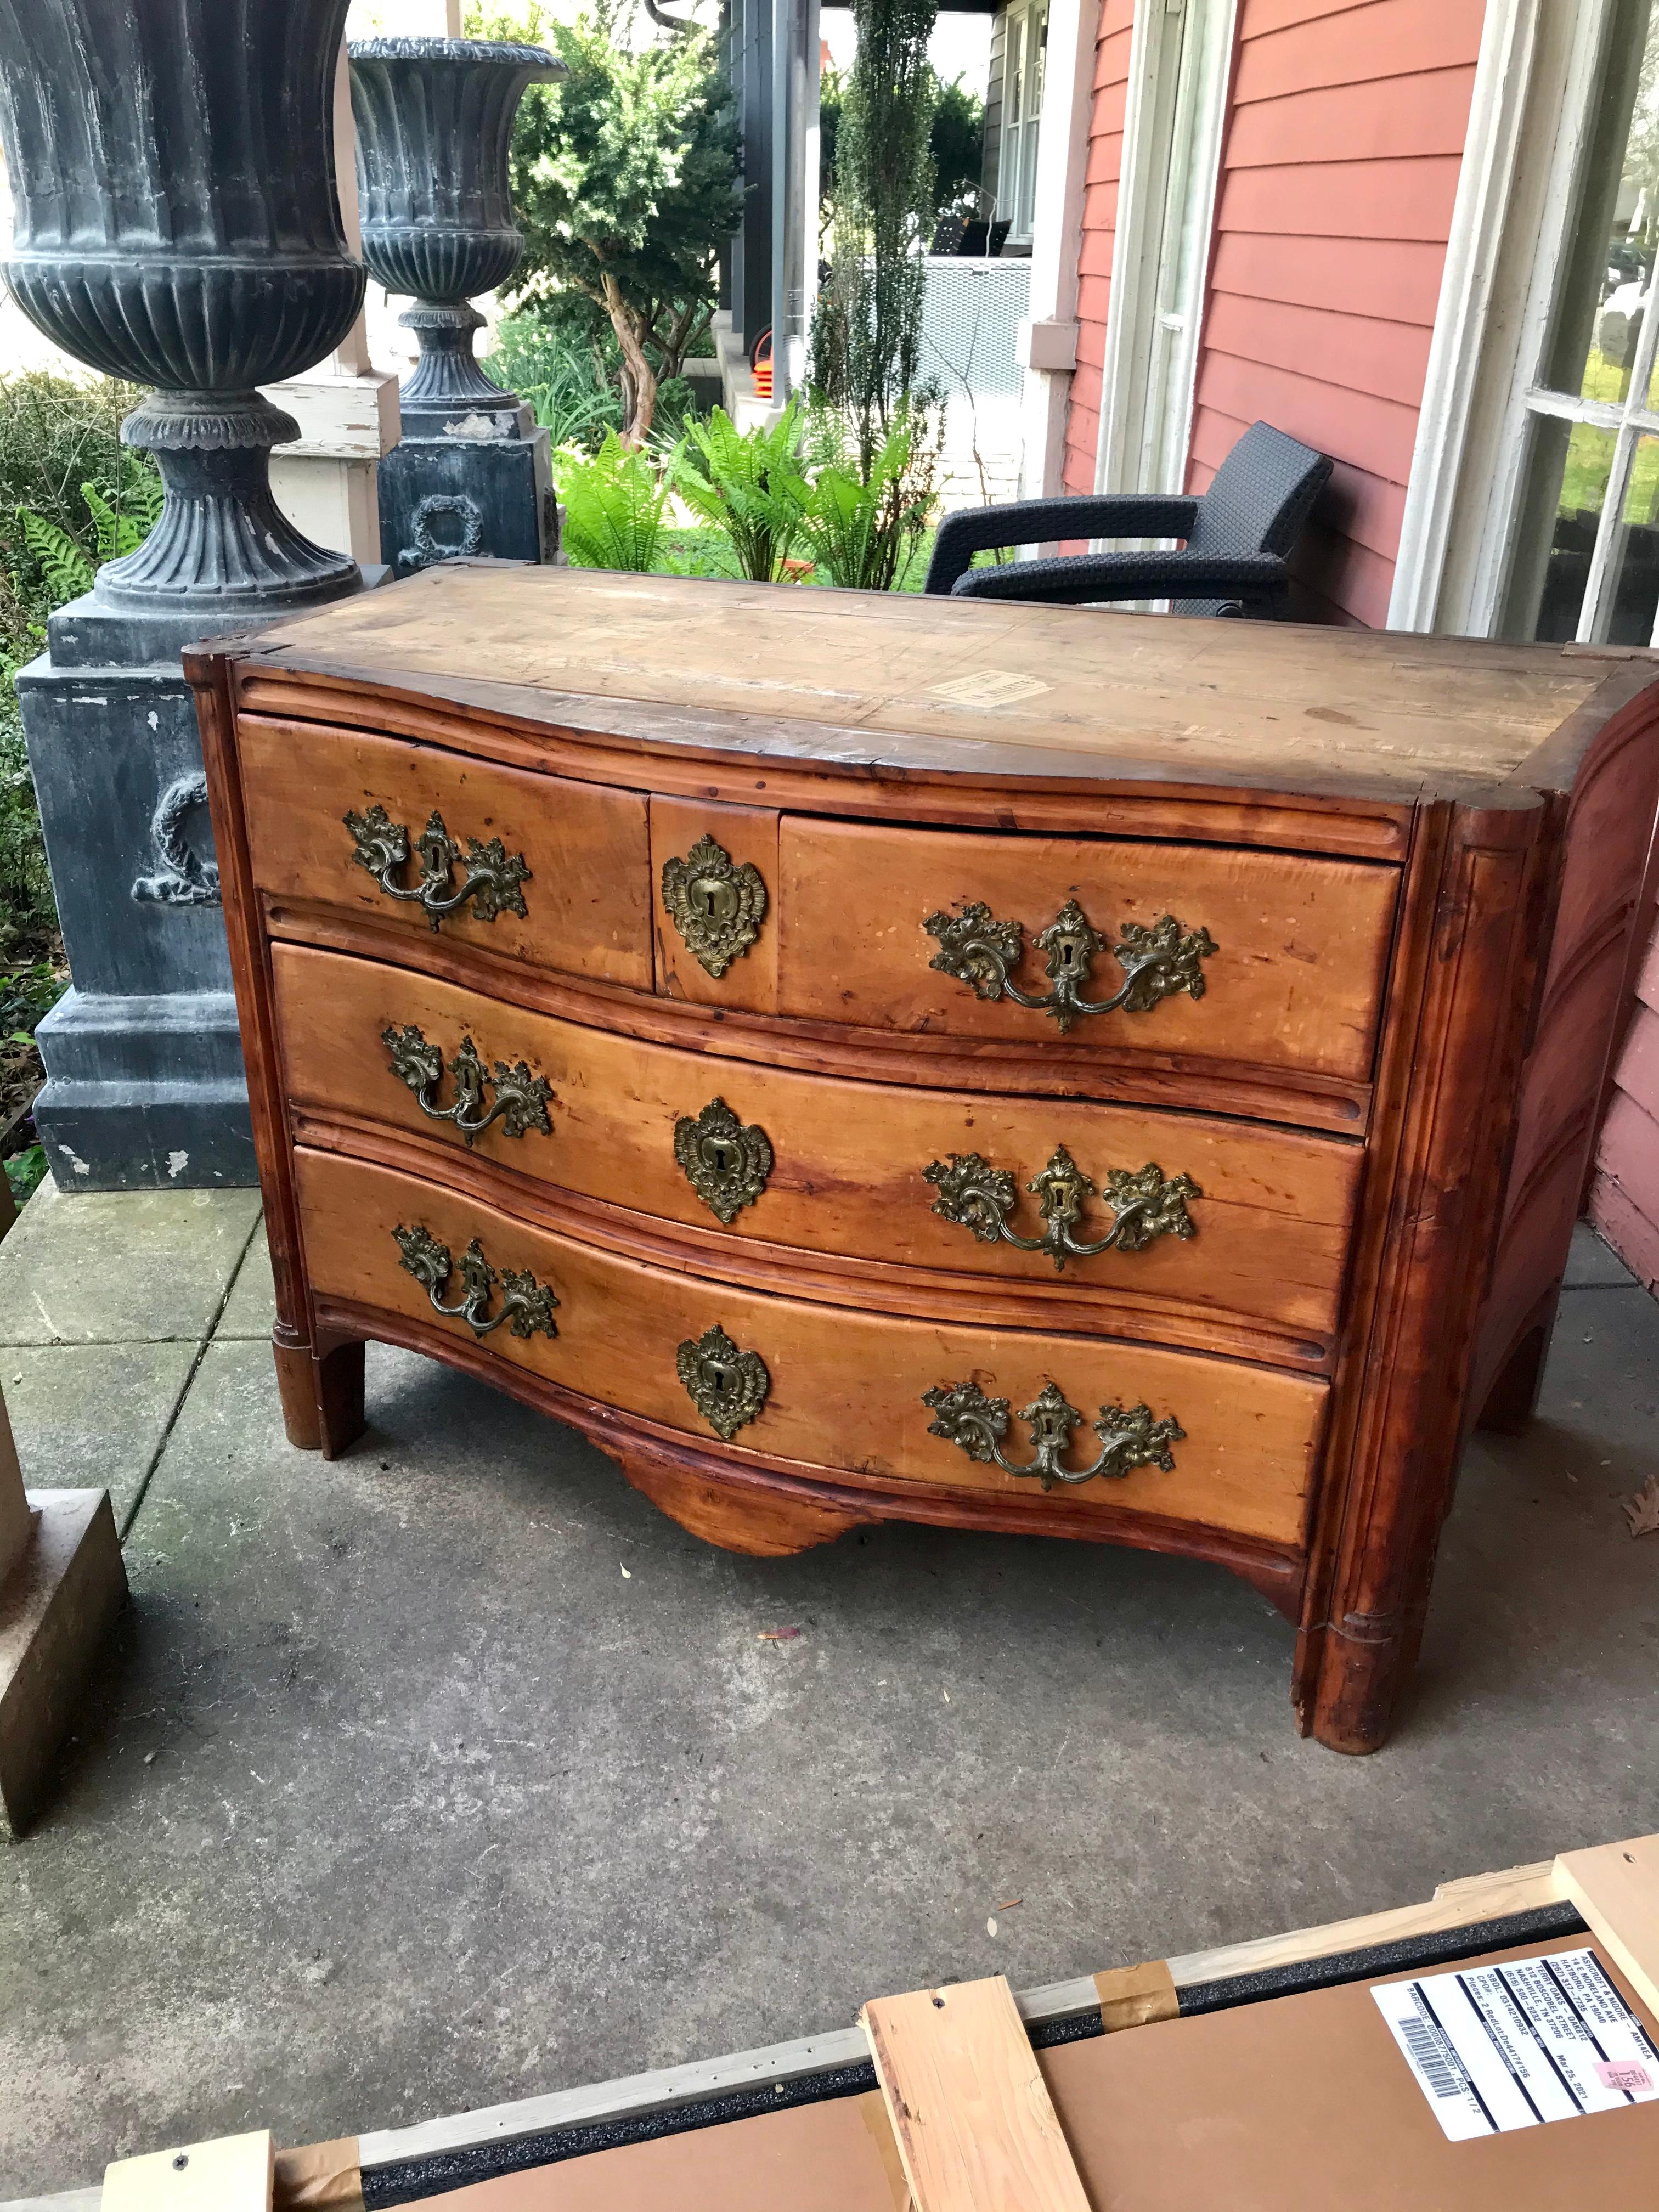 The carcass of beechwood and the drawers ,possibly butternut or poplar. A marvelous patina and stunning color. Deliciously distressed. Warm. Apparently original gilt  hardware, most gilding worn .Appears to be original hand hewn marble. Strong